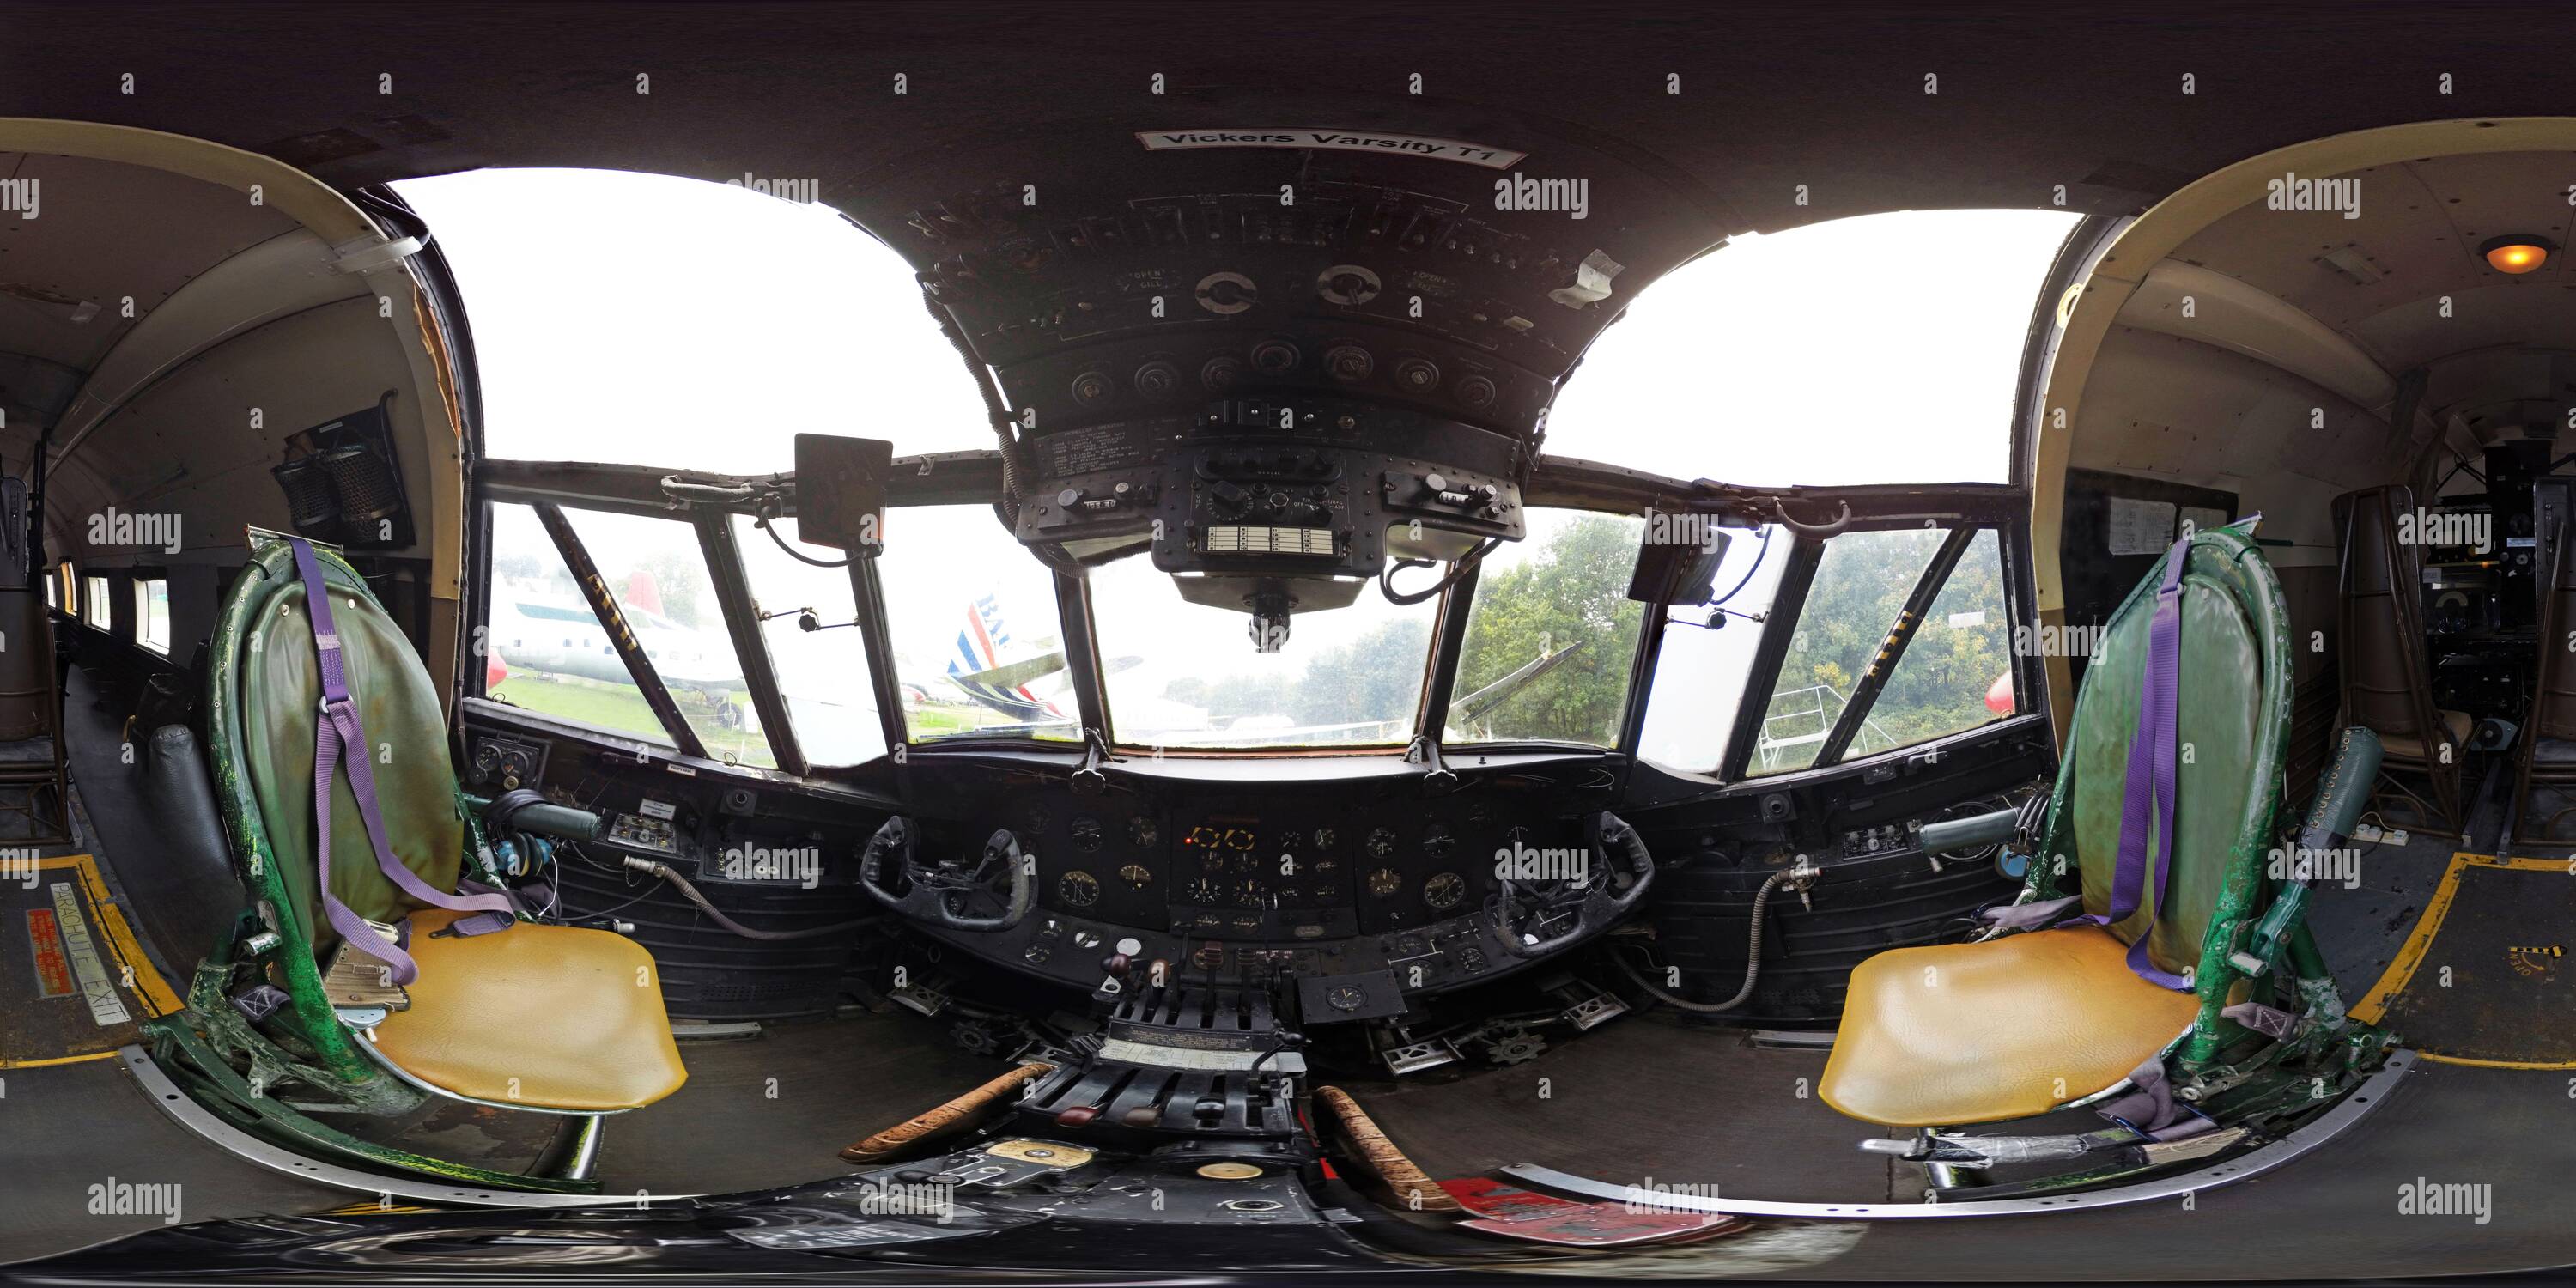 360 degree panoramic view of Take a look around the cockpit area of the trainee bomber Vickers Varsity. PICTURE CREDIT : © MARK PAIN / ALAMY